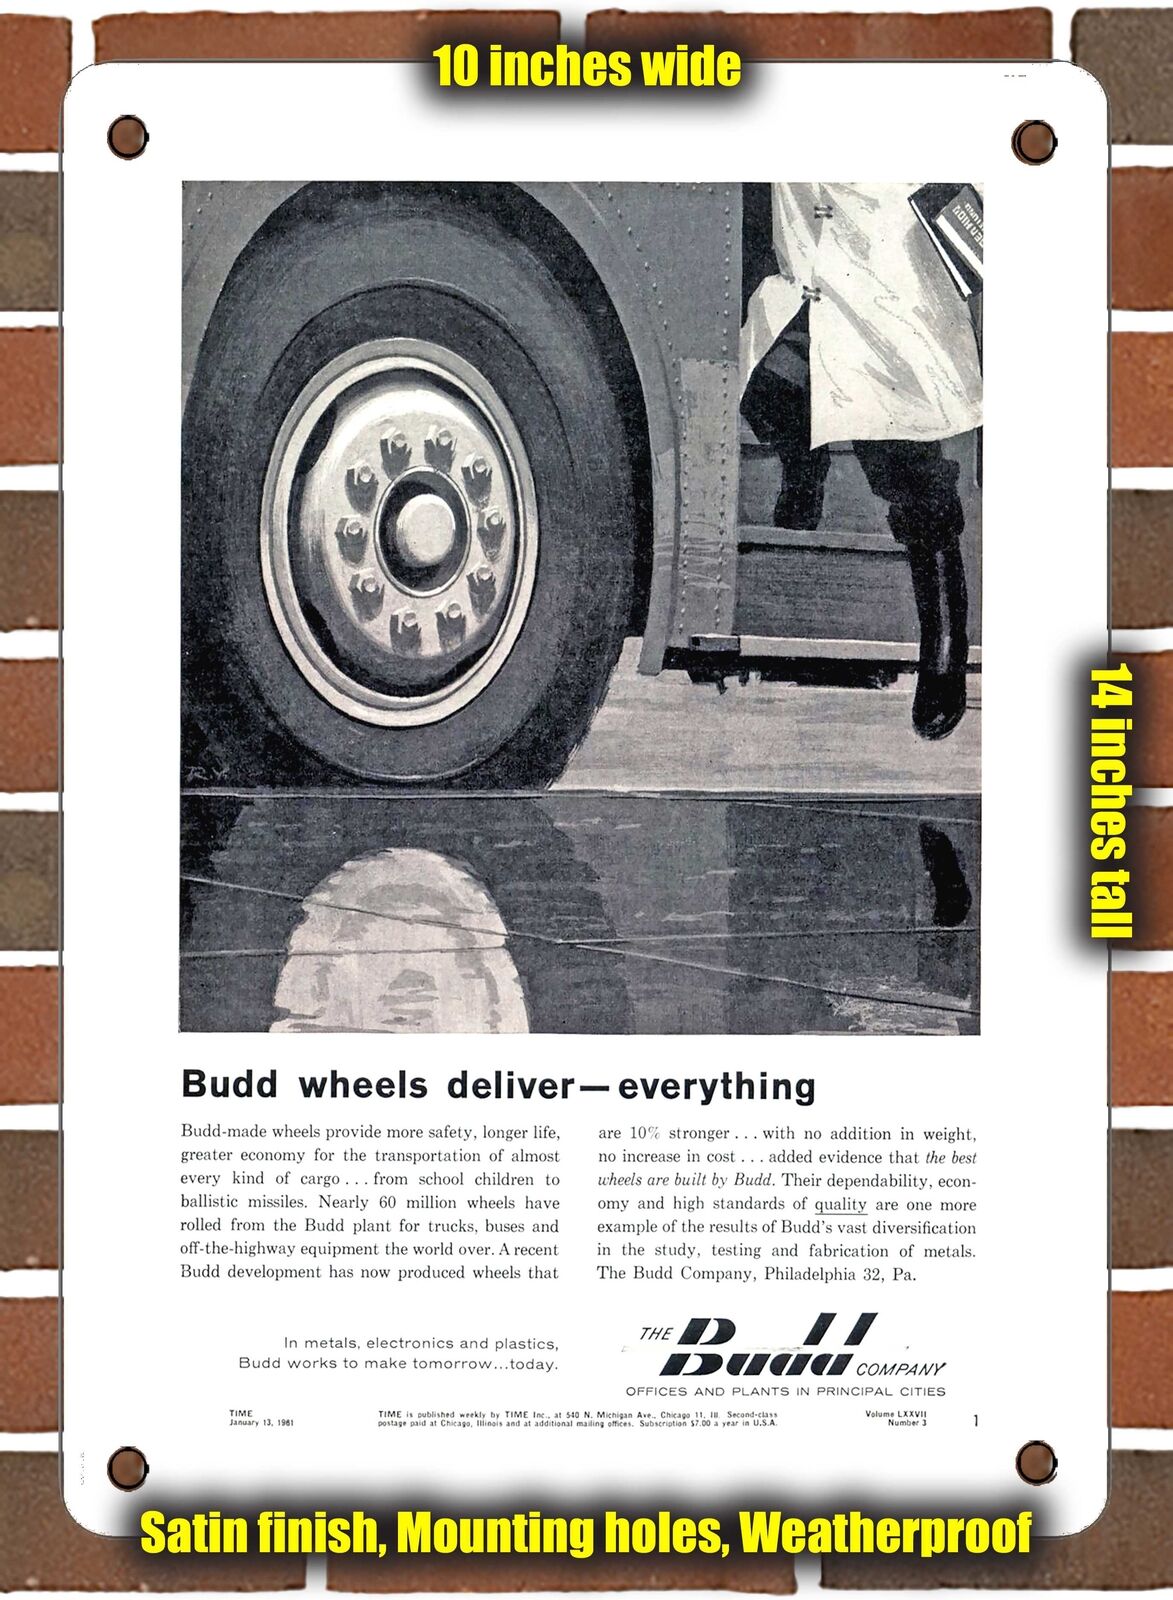 METAL SIGN - 1961 Budd Wheels Deliver Everything - 10x14 Inches